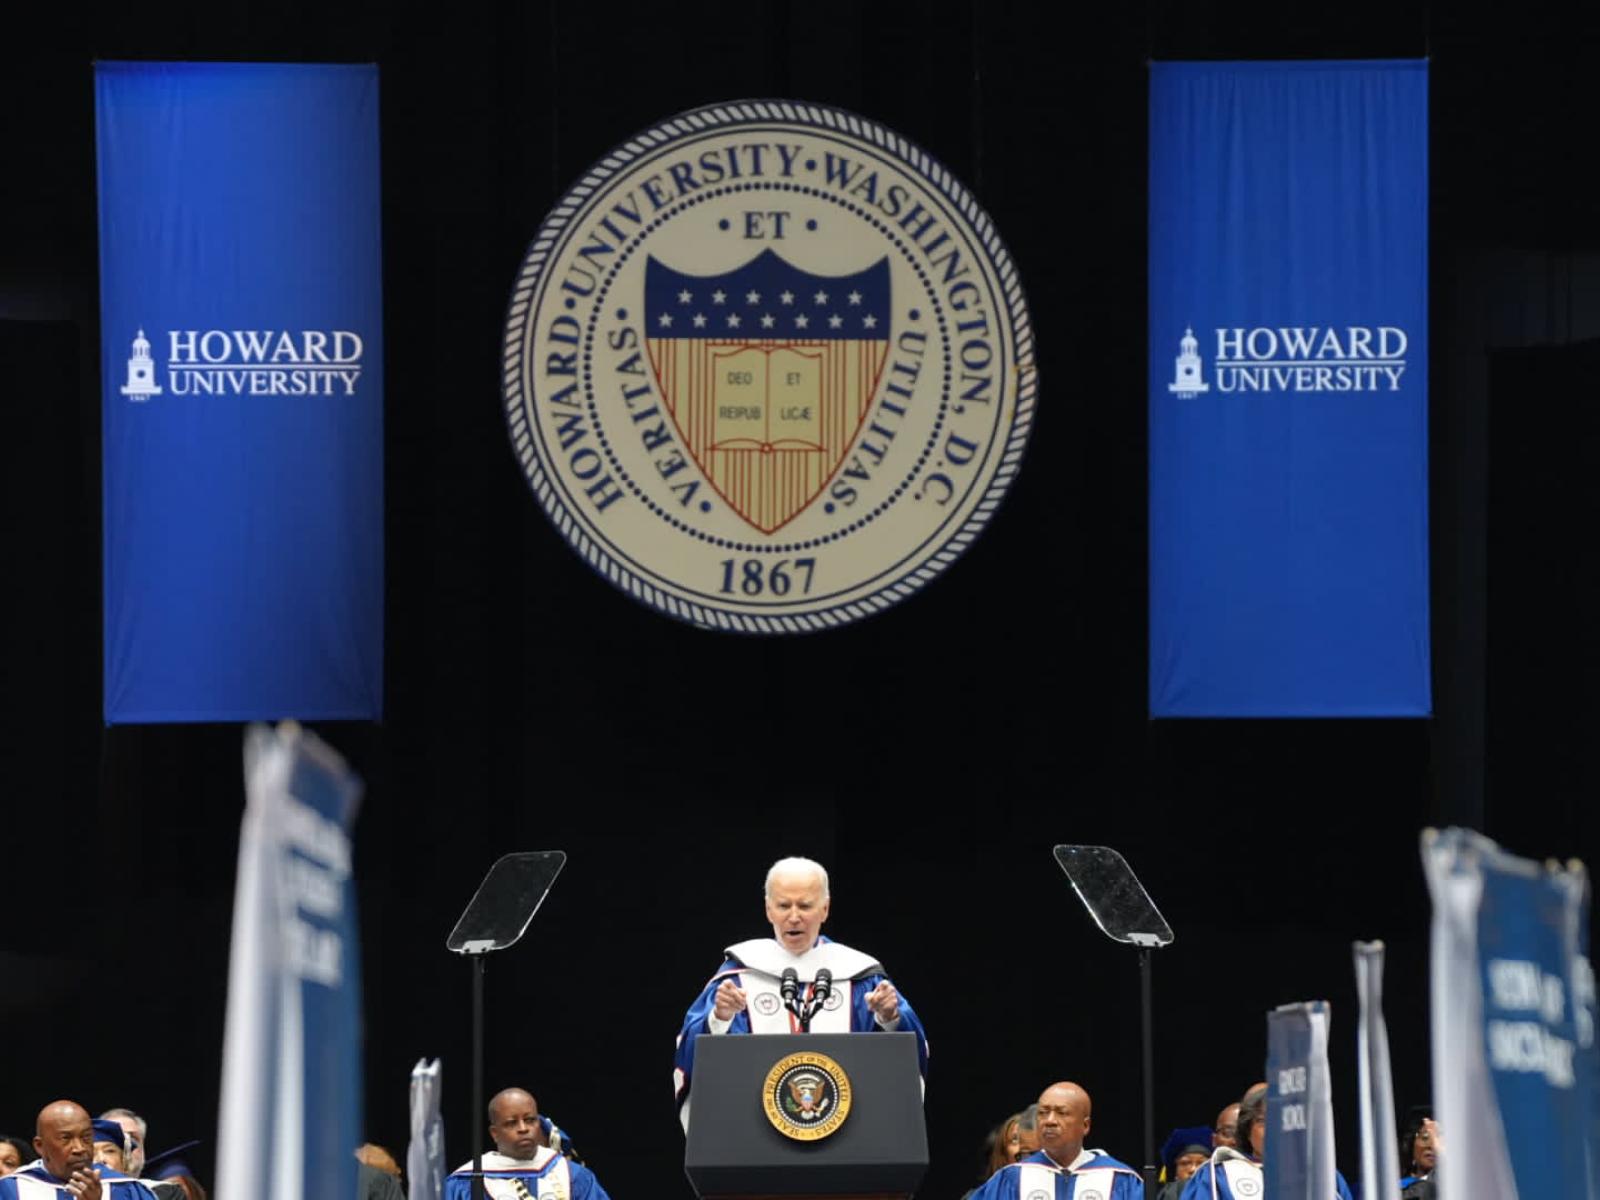 Joseph R. Biden addresses graduates and attendees of the Howard University's 155th Commencement Ceremony